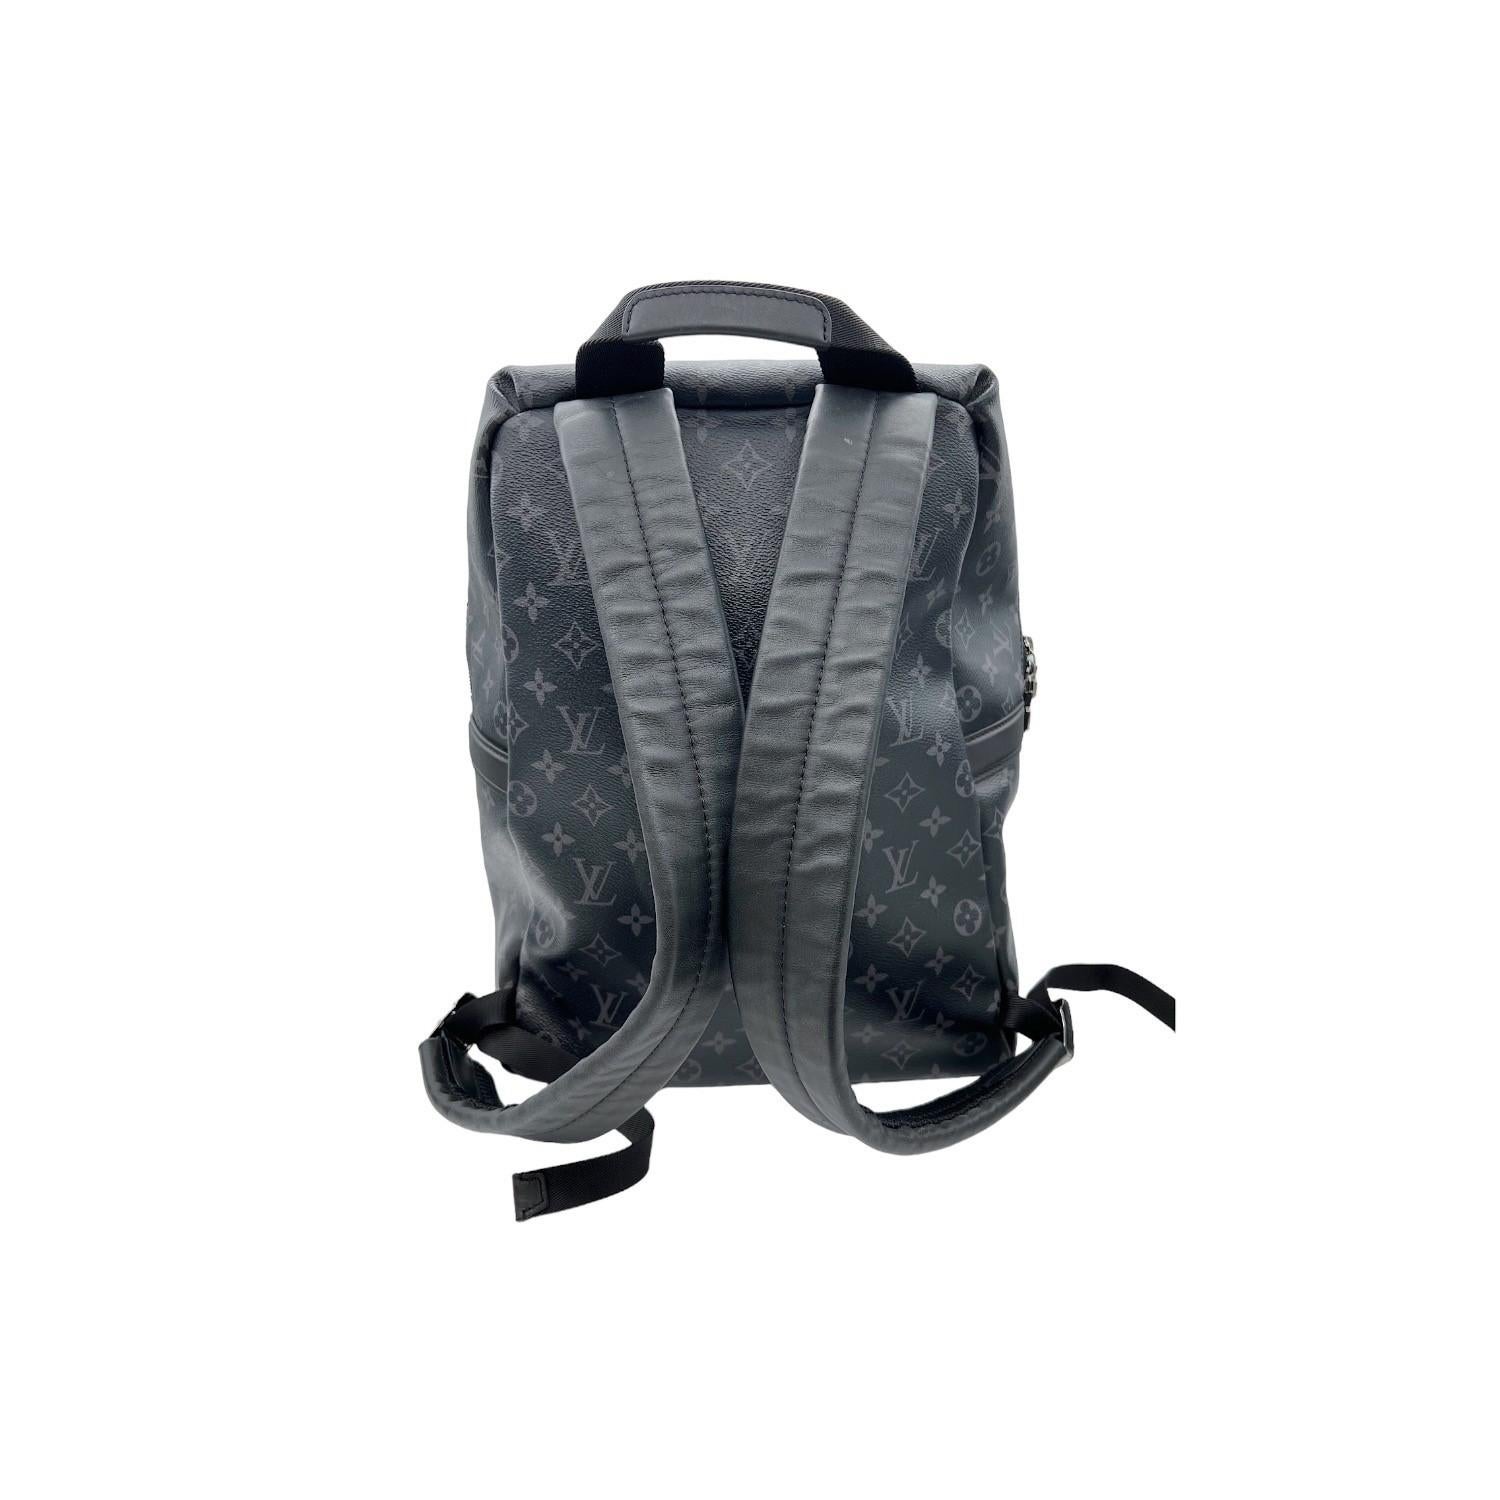 This very beautiful Louis Vuitton Discovery Backpack was made in France in 2019, and it is finely crafted of the classic Louis Vuitton Monogram Eclipse coated canvas with black leather trimming and silver-tone hardware features. It has top handle